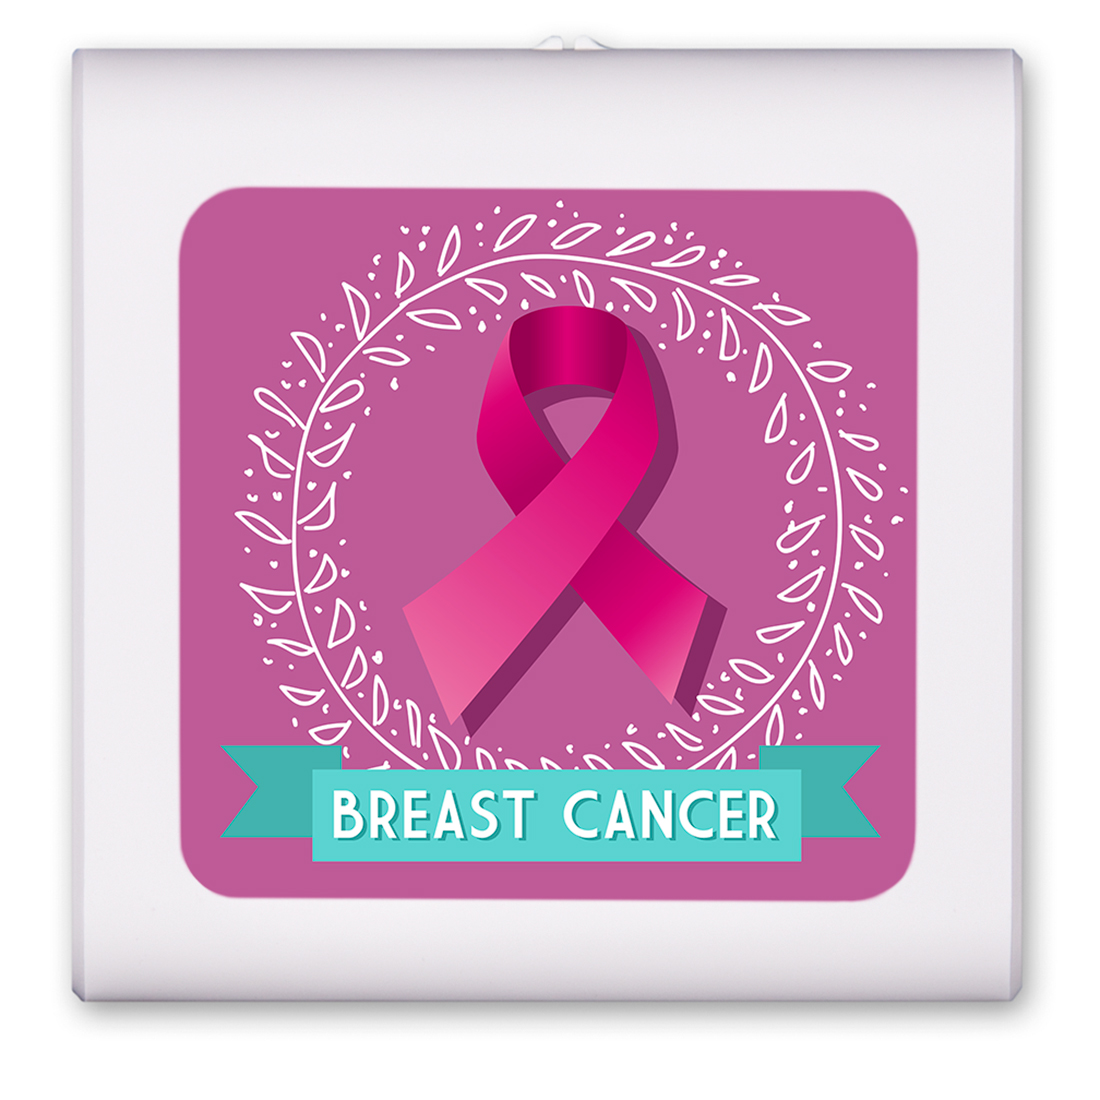 Breast Cancer - #2561